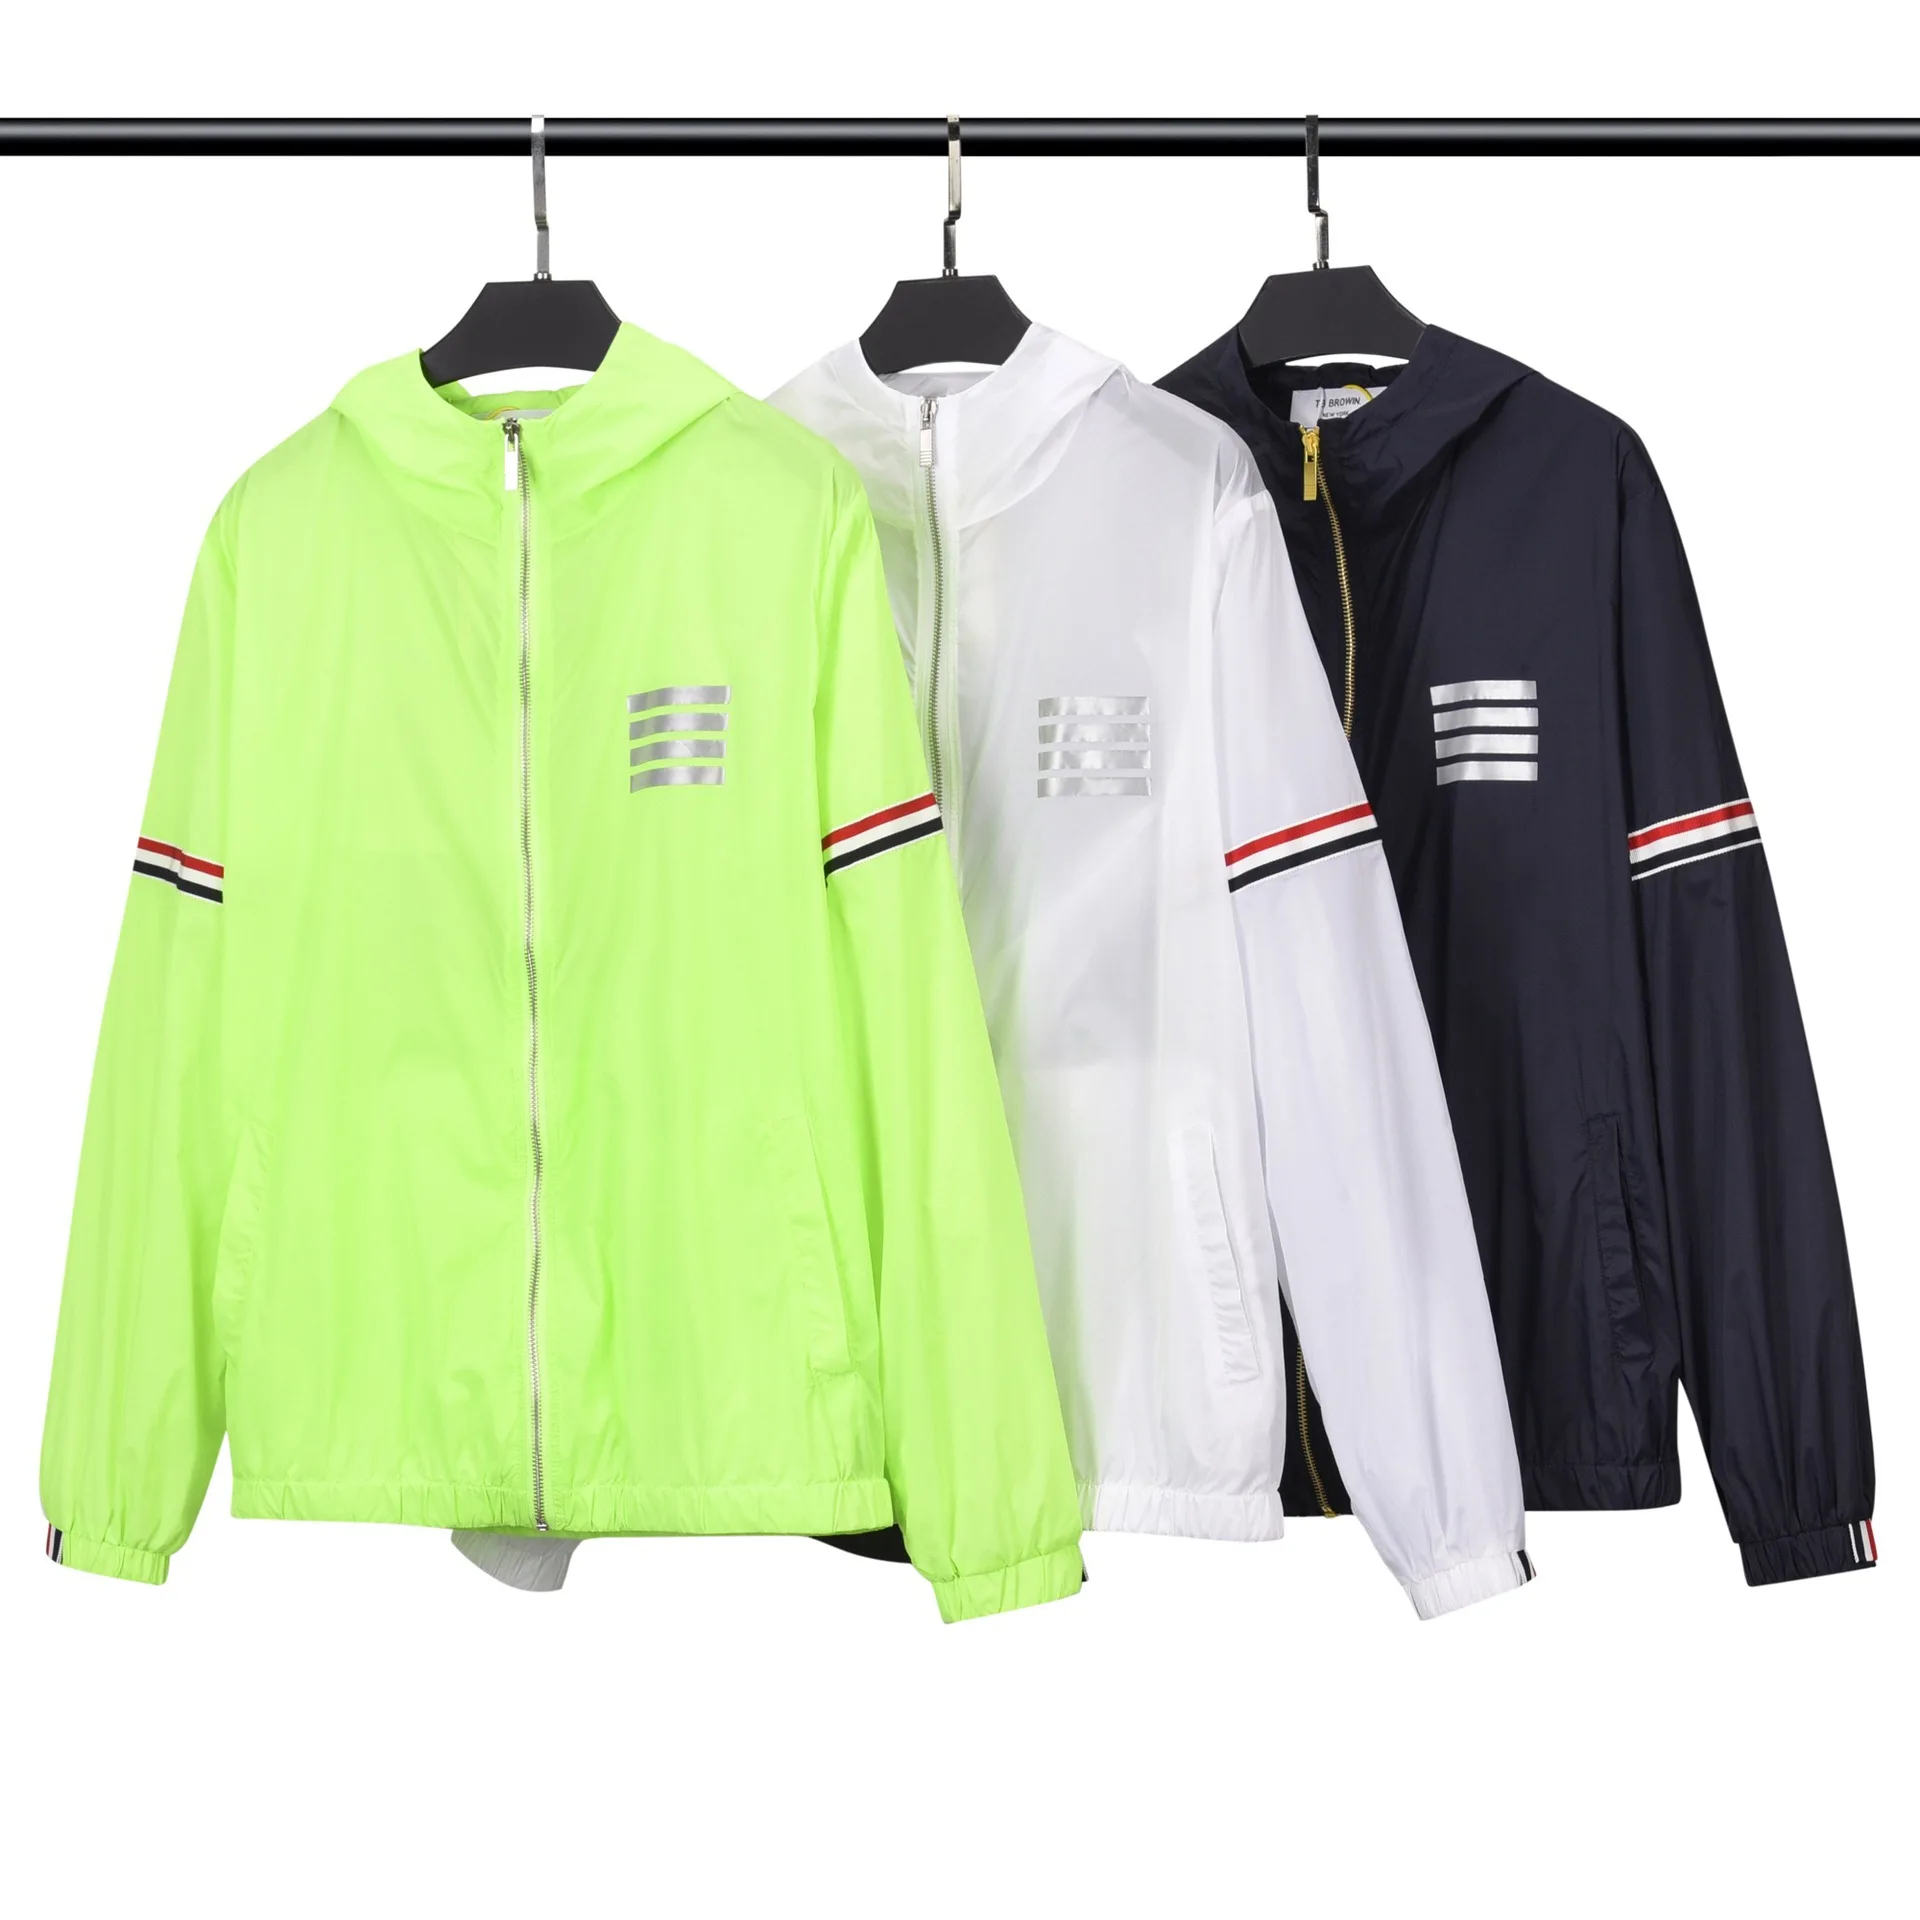 TB BROWIN new TB sun protection clothing men and women's same reflective strip red white blue coat couple's jacket summer UV pro